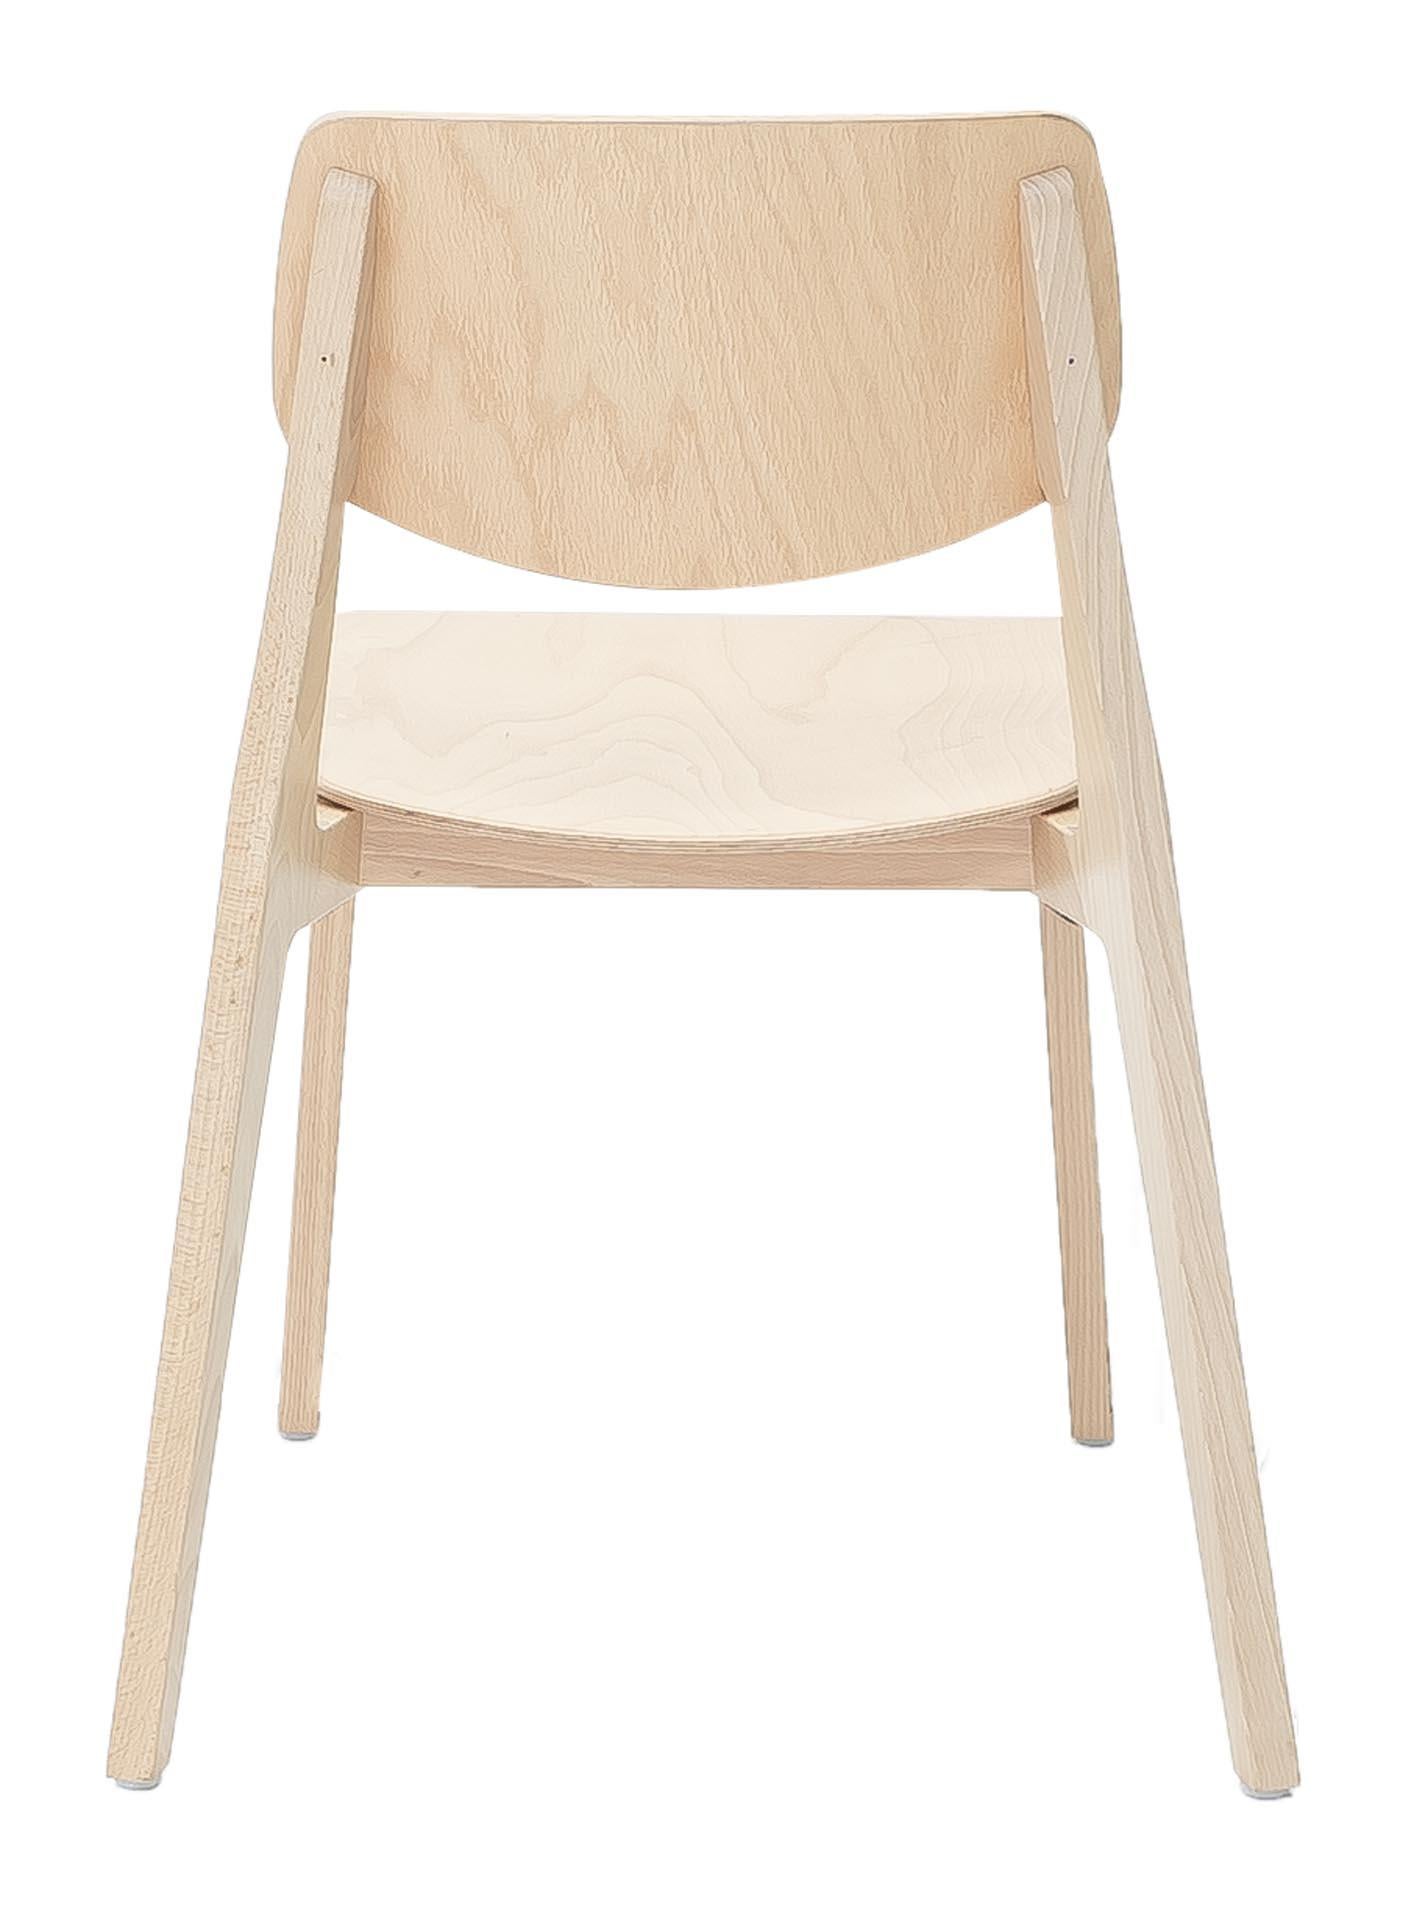 Felber C14 Beech wood Chairs by Dietiker, Exchangeable Back and Seat, Set of 4 In New Condition For Sale In Stein am Rhein, CH